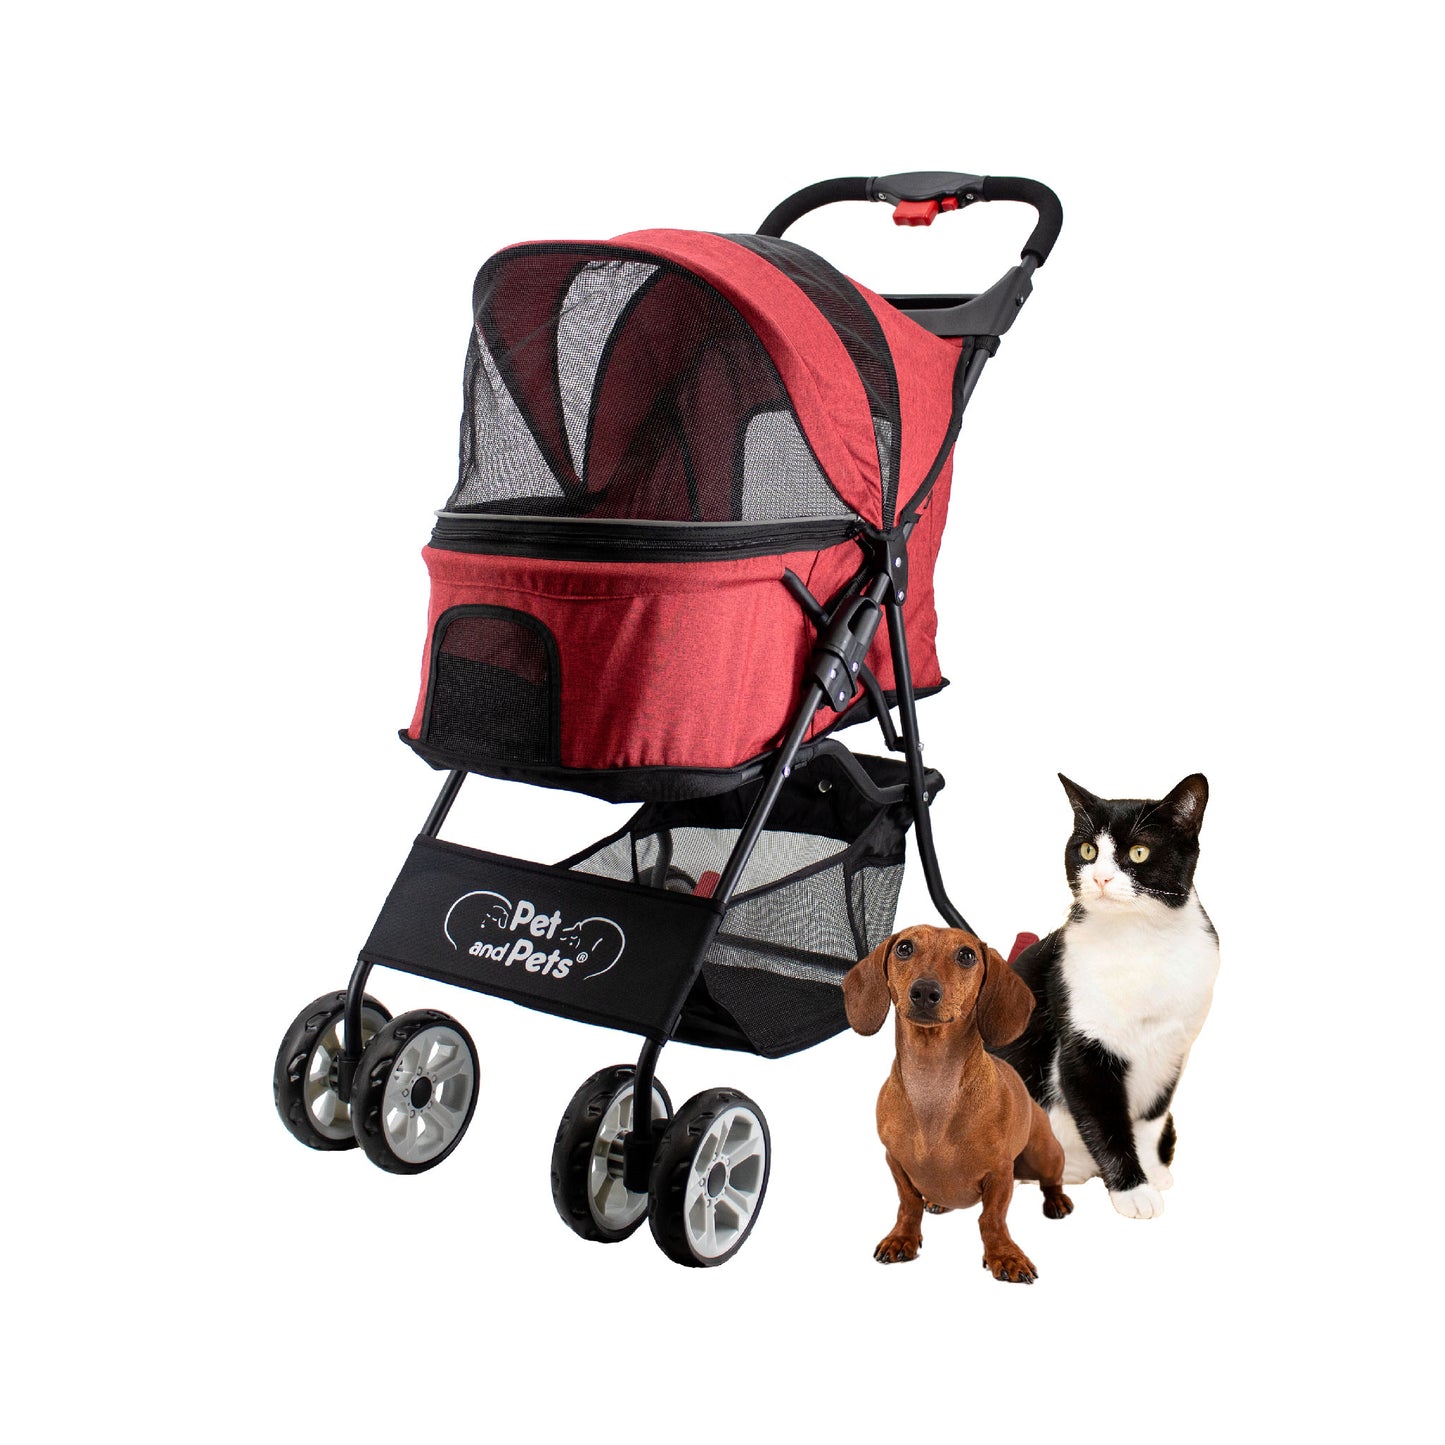 Catalina Pet Stroller: Durable, Lightweight, Compact Fold, Ventilation, Pee Pad Insert, Cup Holder, for Dogs/Cats/Pets up to 45LB